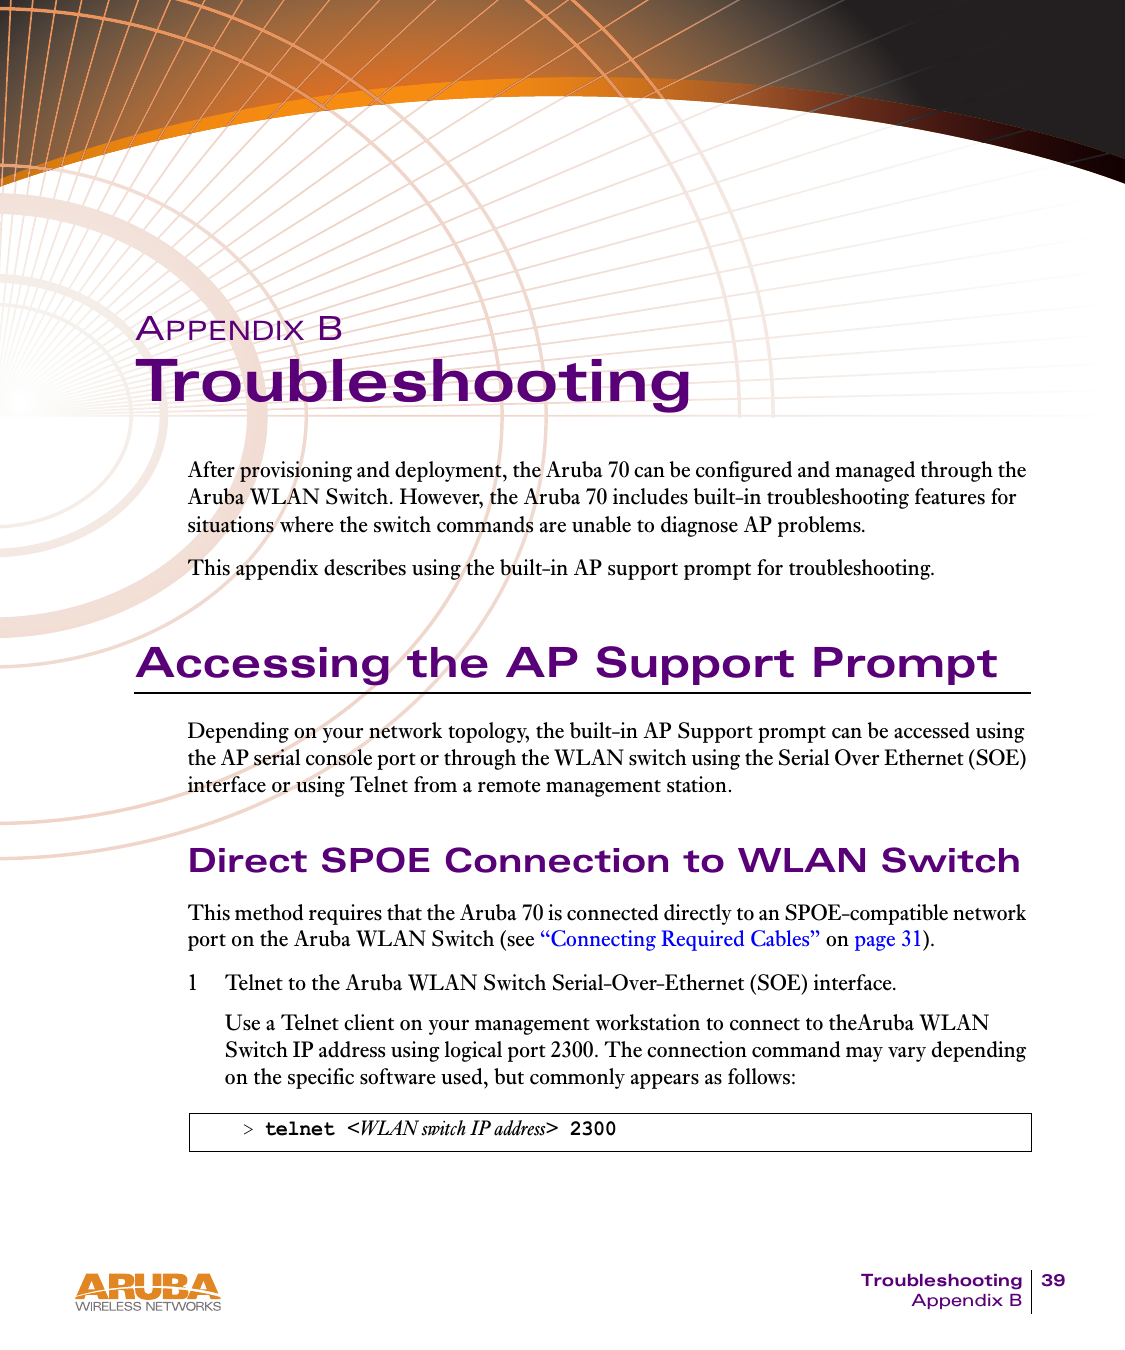 Troubleshooting 39Appendix BAPPENDIX BTroubleshootingAfter provisioning and deployment, the Aruba 70 can be configured and managed through the Aruba WLAN Switch. However, the Aruba 70 includes built-in troubleshooting features for situations where the switch commands are unable to diagnose AP problems.This appendix describes using the built-in AP support prompt for troubleshooting.Accessing the AP Support PromptDepending on your network topology, the built-in AP Support prompt can be accessed using the AP serial console port or through the WLAN switch using the Serial Over Ethernet (SOE) interface or using Telnet from a remote management station.Direct SPOE Connection to WLAN SwitchThis method requires that the Aruba 70 is connected directly to an SPOE-compatible network port on the Aruba WLAN Switch (see “Connecting Required Cables” on page 31).1 Telnet to the Aruba WLAN Switch Serial-Over-Ethernet (SOE) interface.Use a Telnet client on your management workstation to connect to theAruba WLAN Switch IP address using logical port 2300. The connection command may vary depending on the specific software used, but commonly appears as follows:&gt; telnet &lt;WLAN switch IP address&gt; 2300